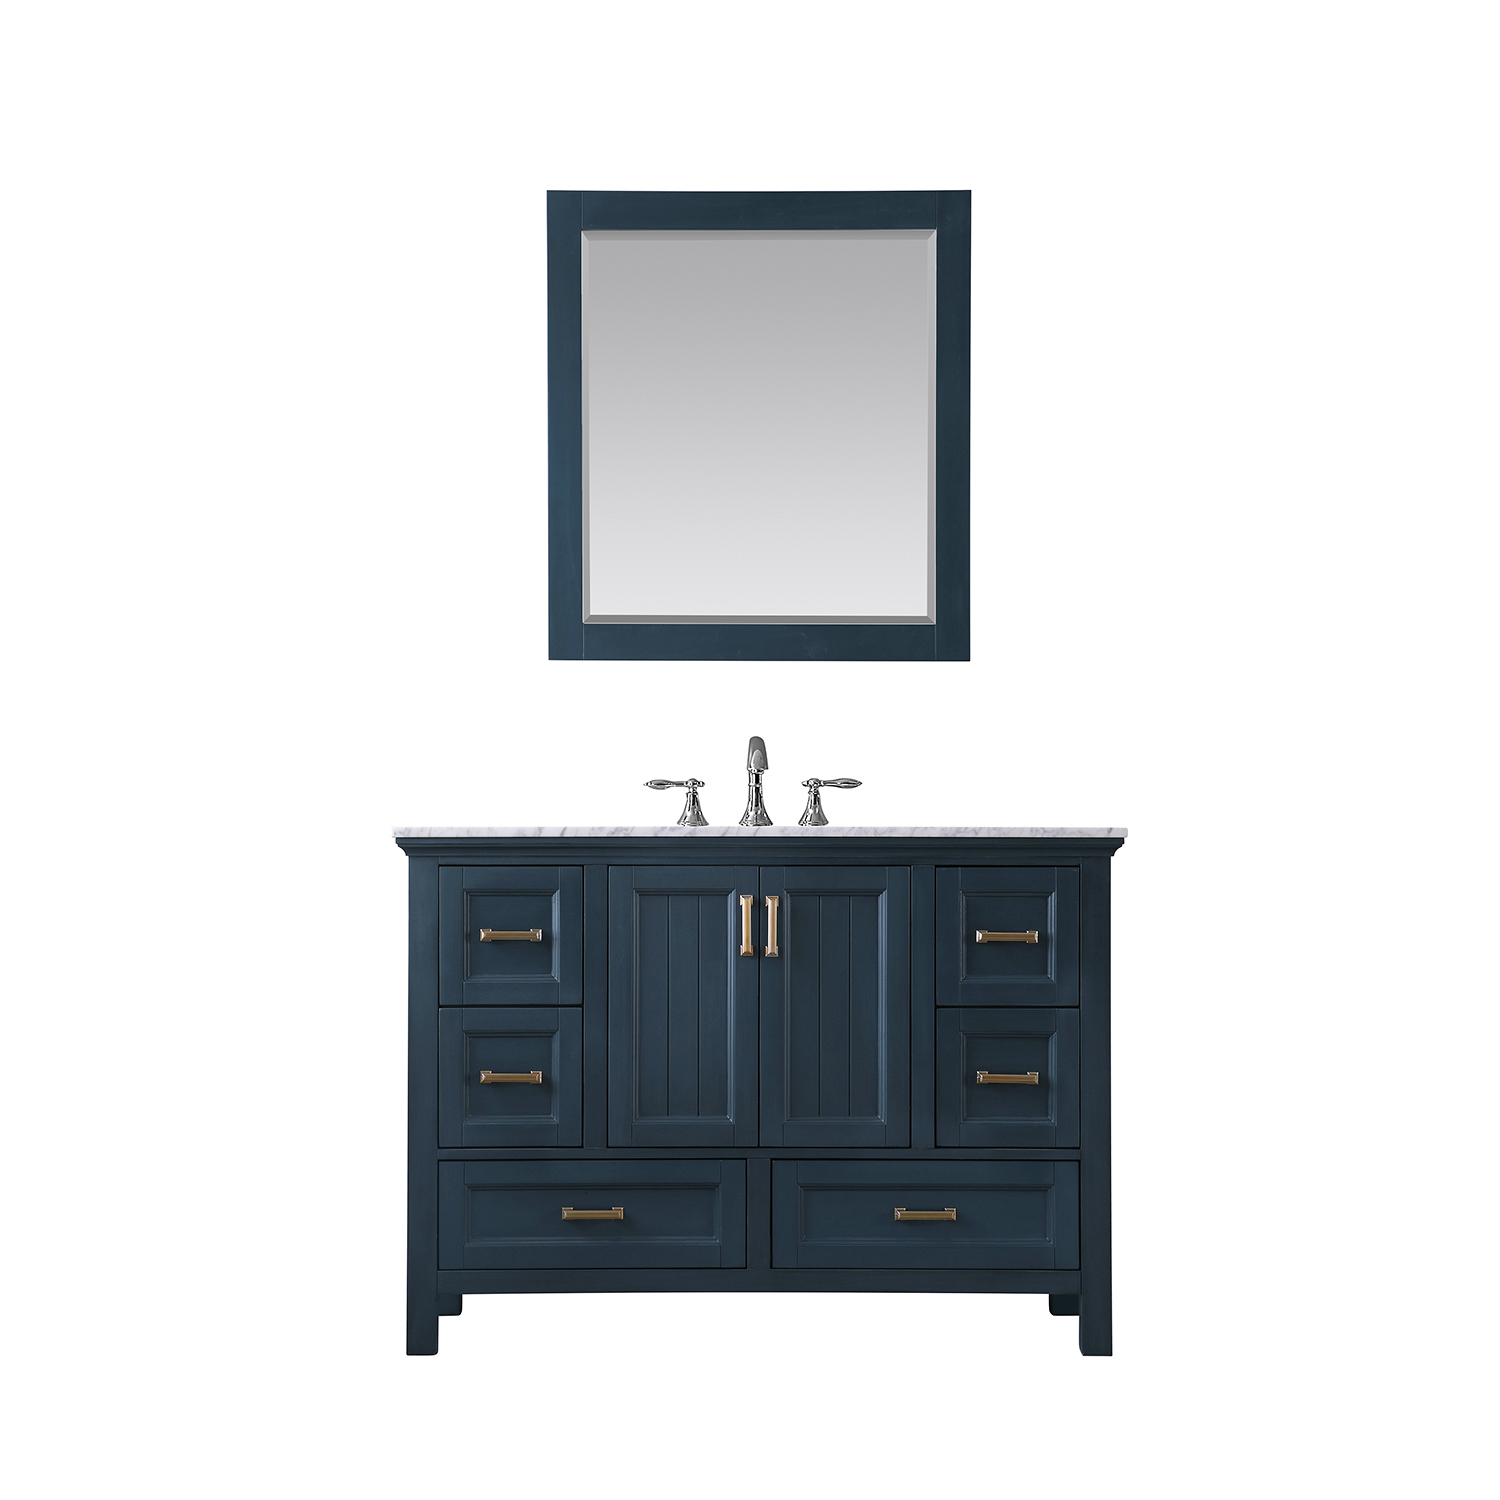 Issac Edwards Collection 48" Single Bathroom Vanity Set in Classic Blue and Carrara White Marble Countertop without Mirror 